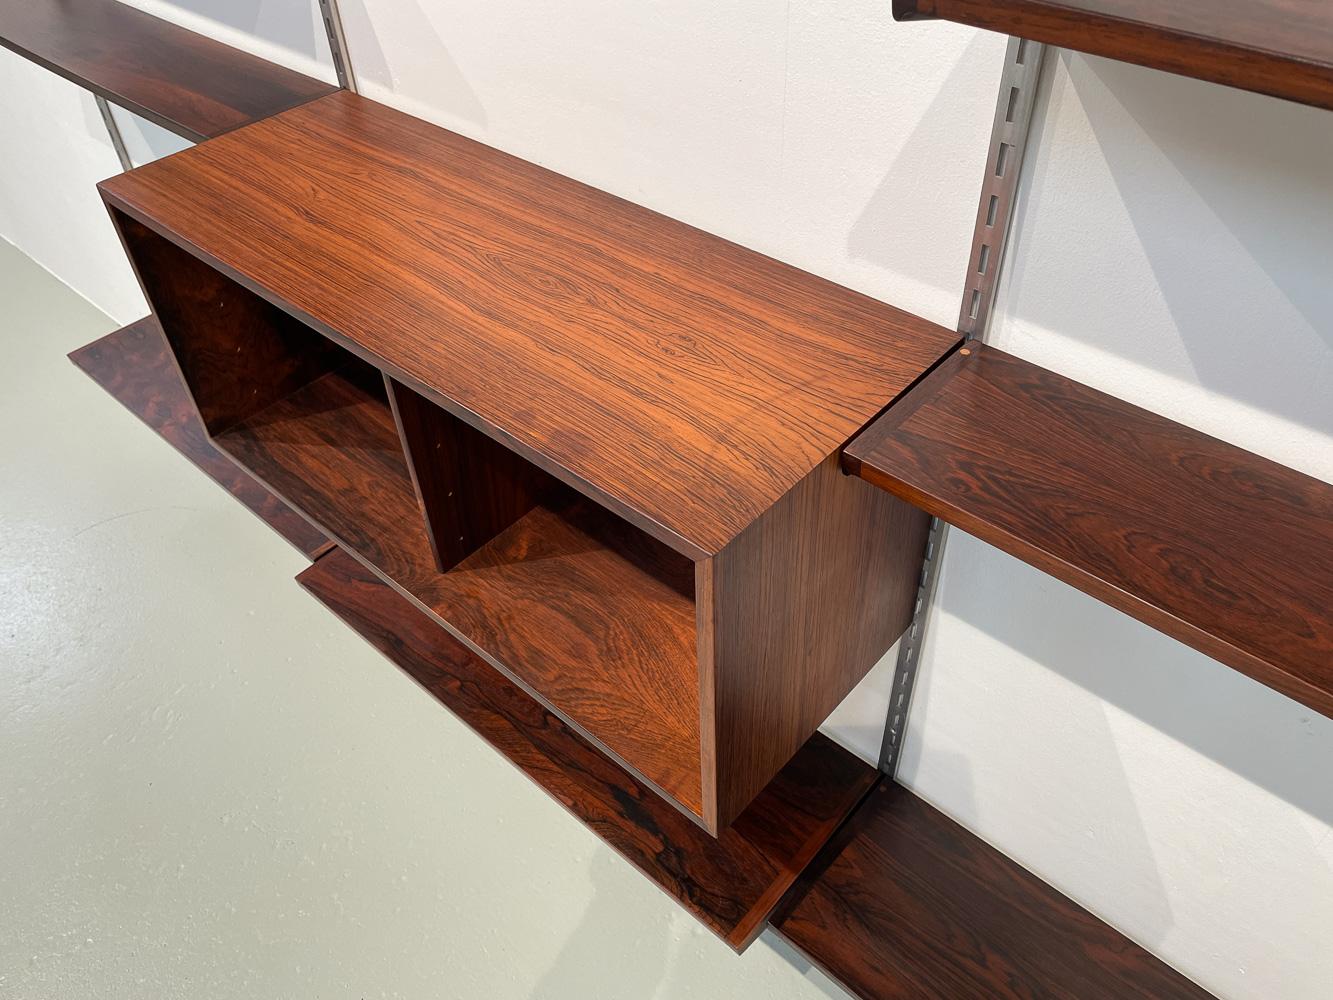 Vintage Danish Rosewood 3-Bay Wall Unit by Kai Kristiansen for FM, 1960s For Sale 1